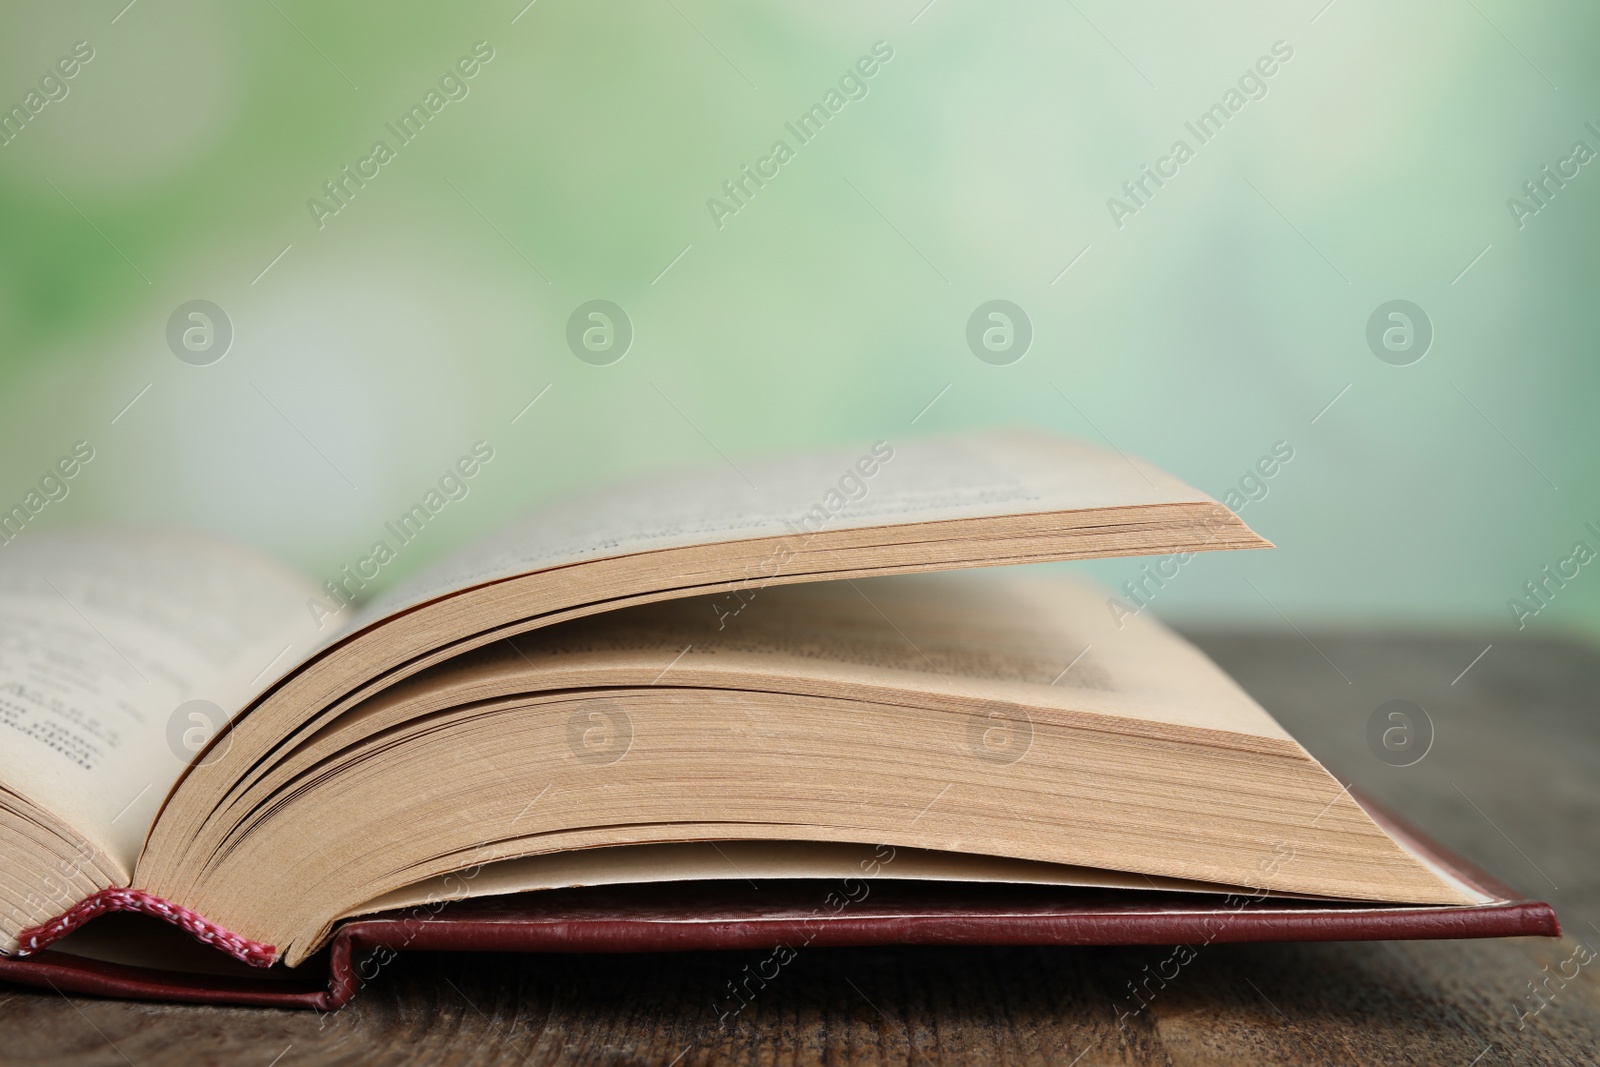 Photo of Open book on wooden table against blurred green background, closeup